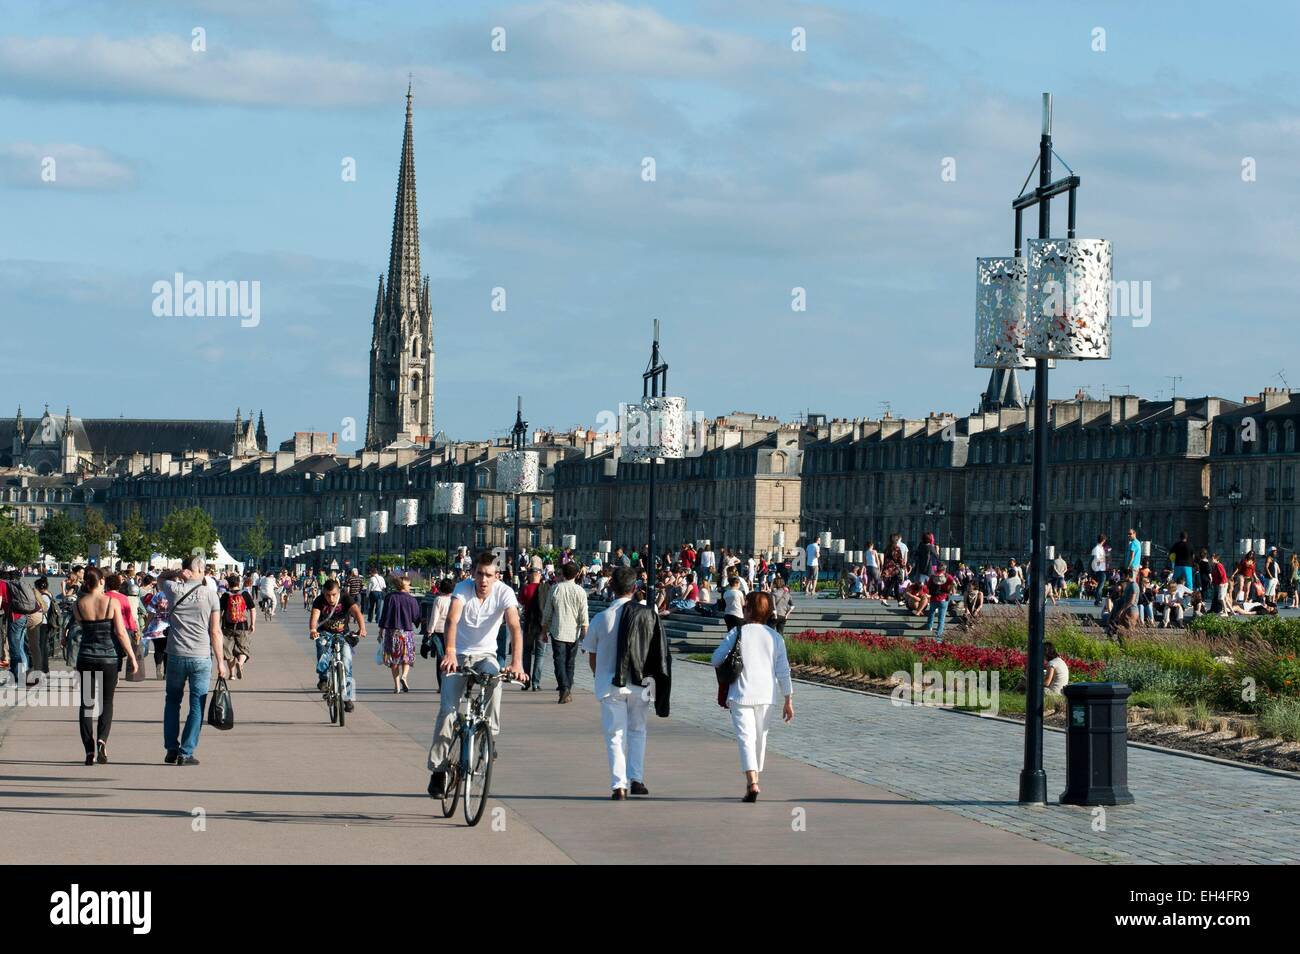 France, Gironde, Bordeaux, area listed as World Heritage Area by UNESCO, Place de la Bourse and Water Mirror work by Michel Courajoud, crowd, bell tower of the Saint Michel Basilica of the 16th century Stock Photo